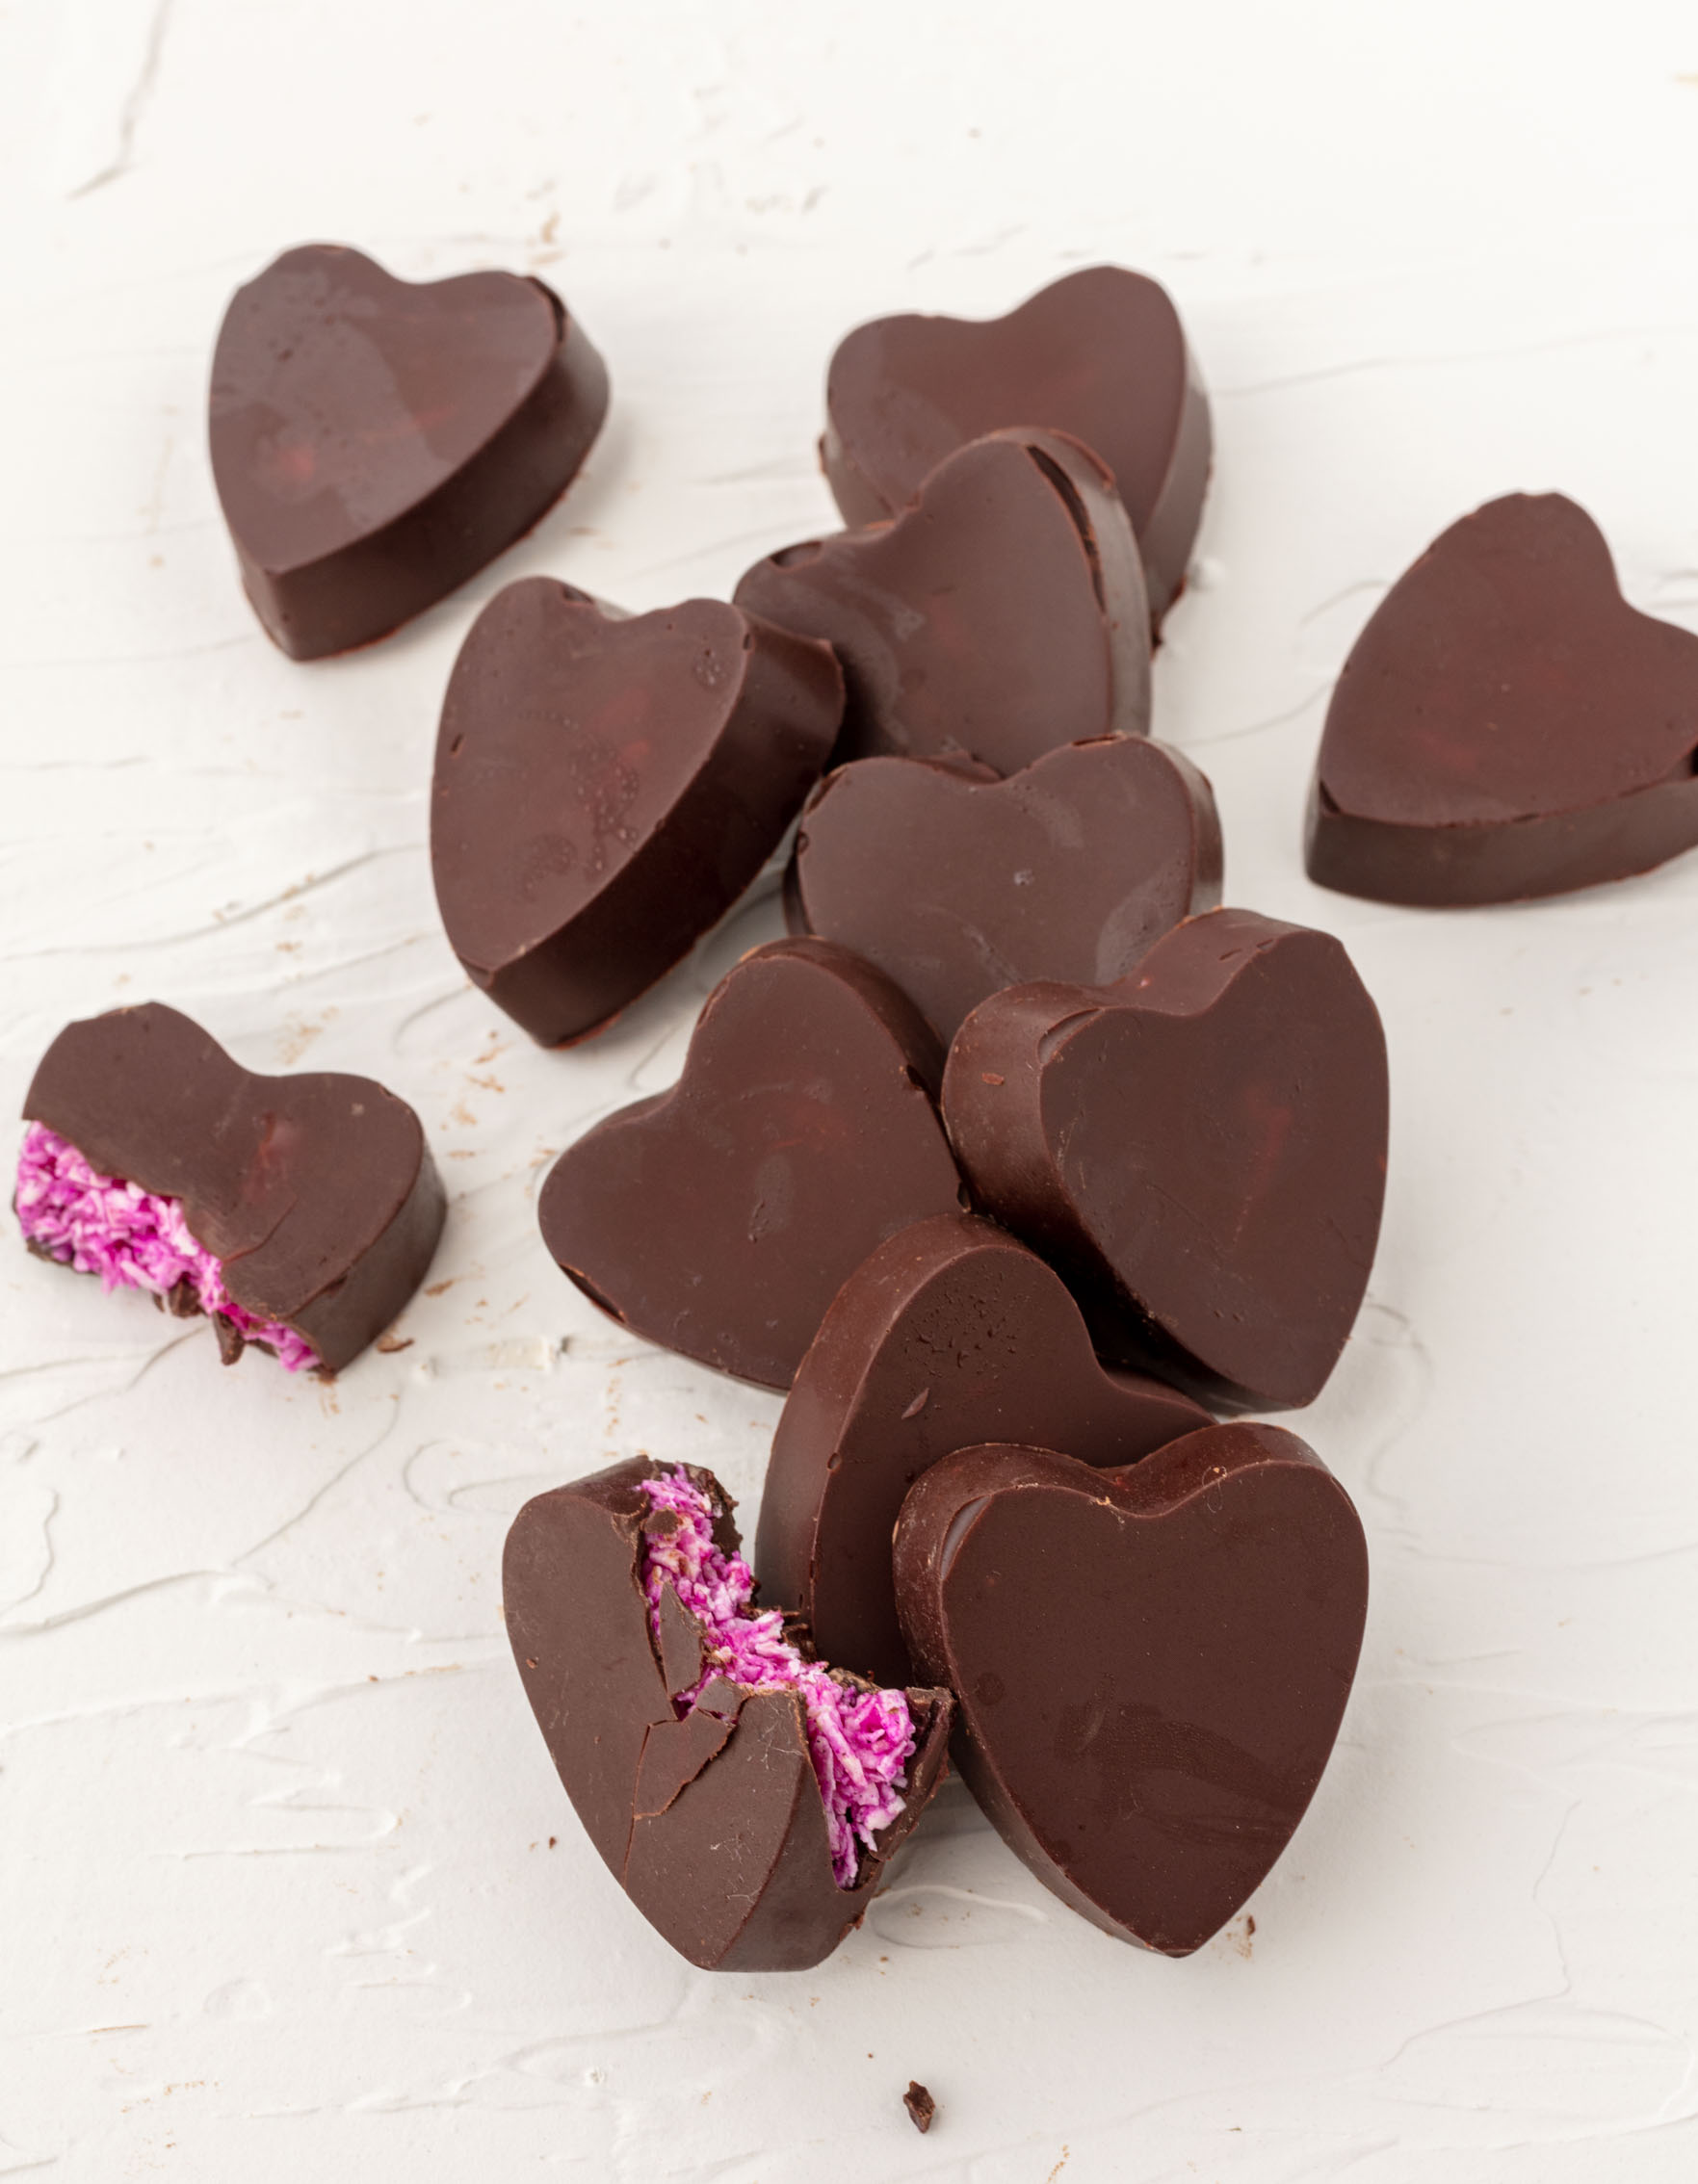 heart shaped chocolates with pink coconut inside.